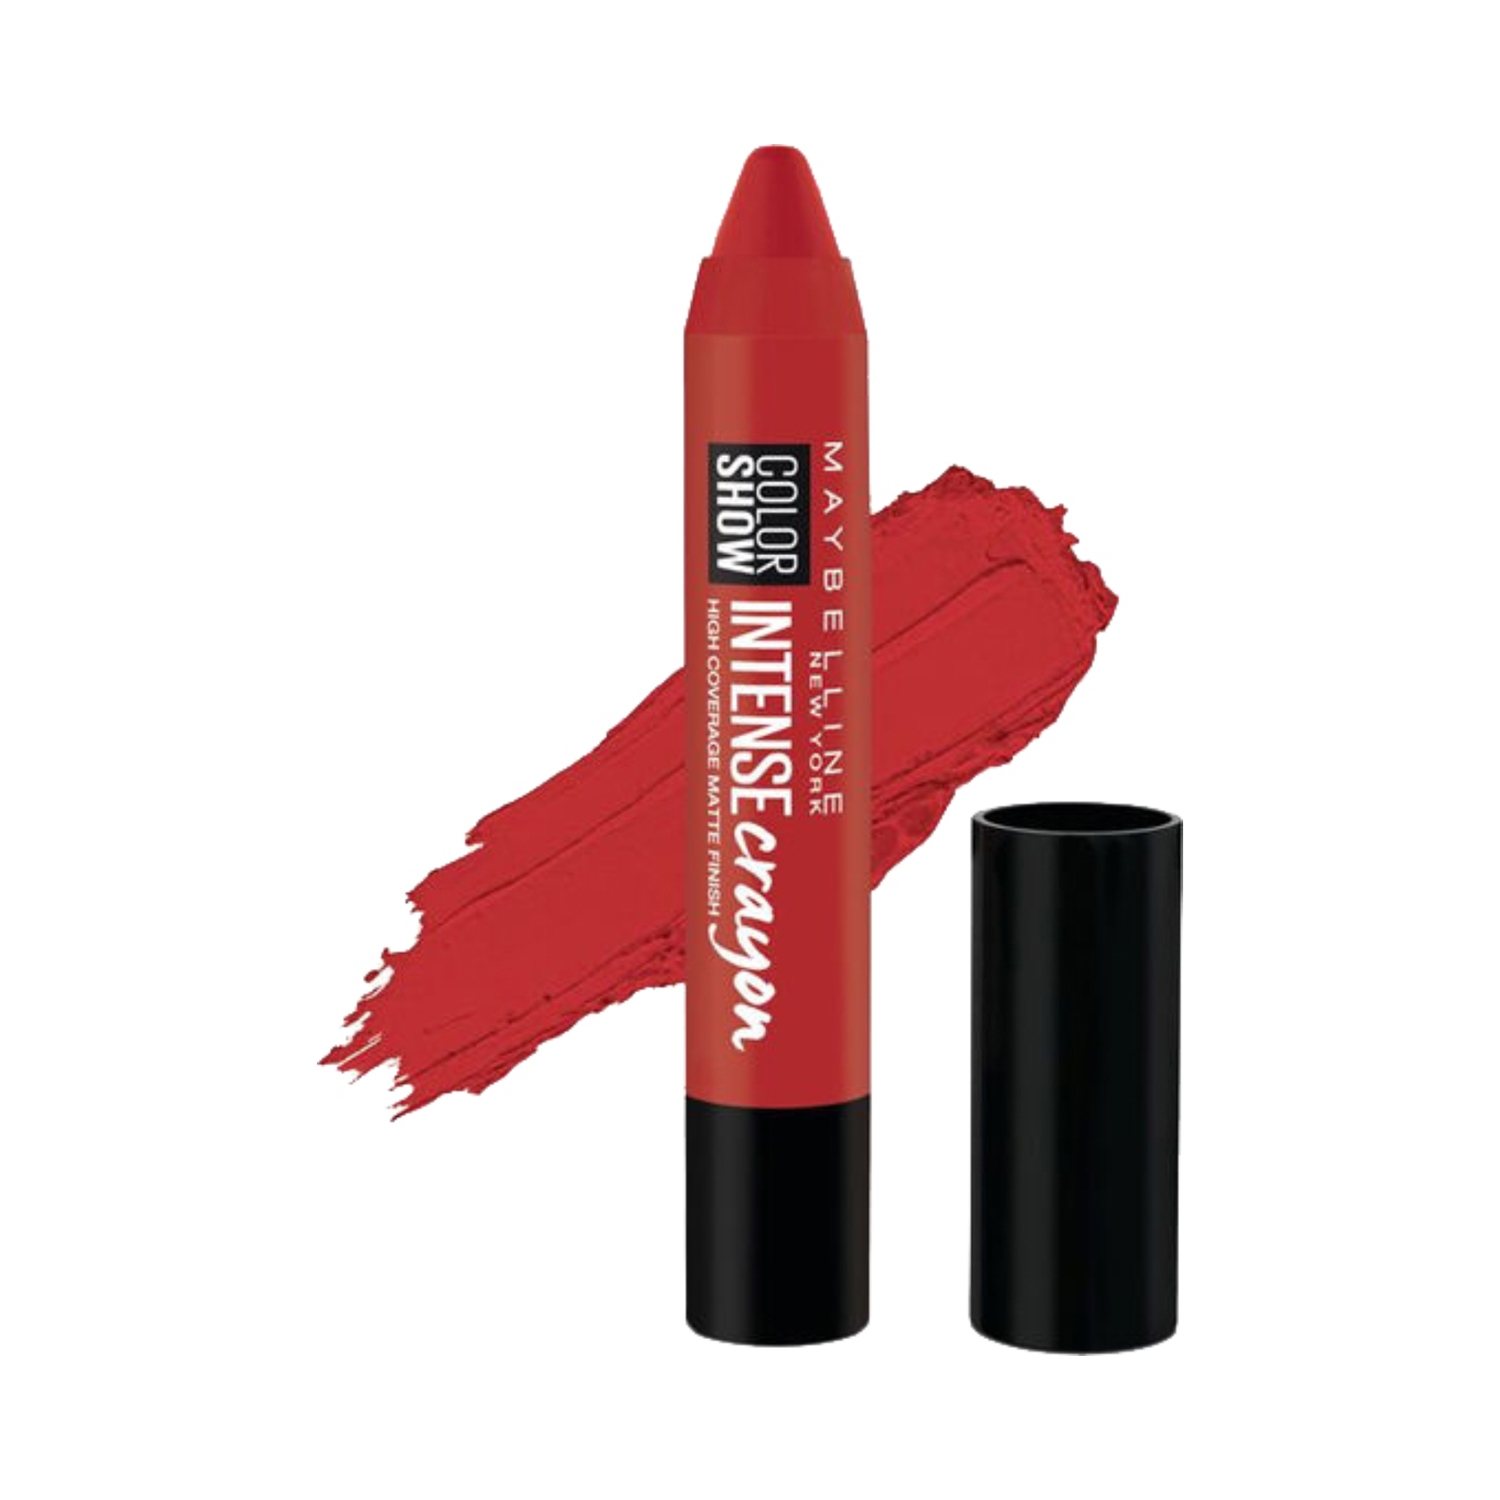 Maybelline New York | Maybelline New York Color Show Intense Lip Crayon SPF 17 - Deep Coral (3.5g)